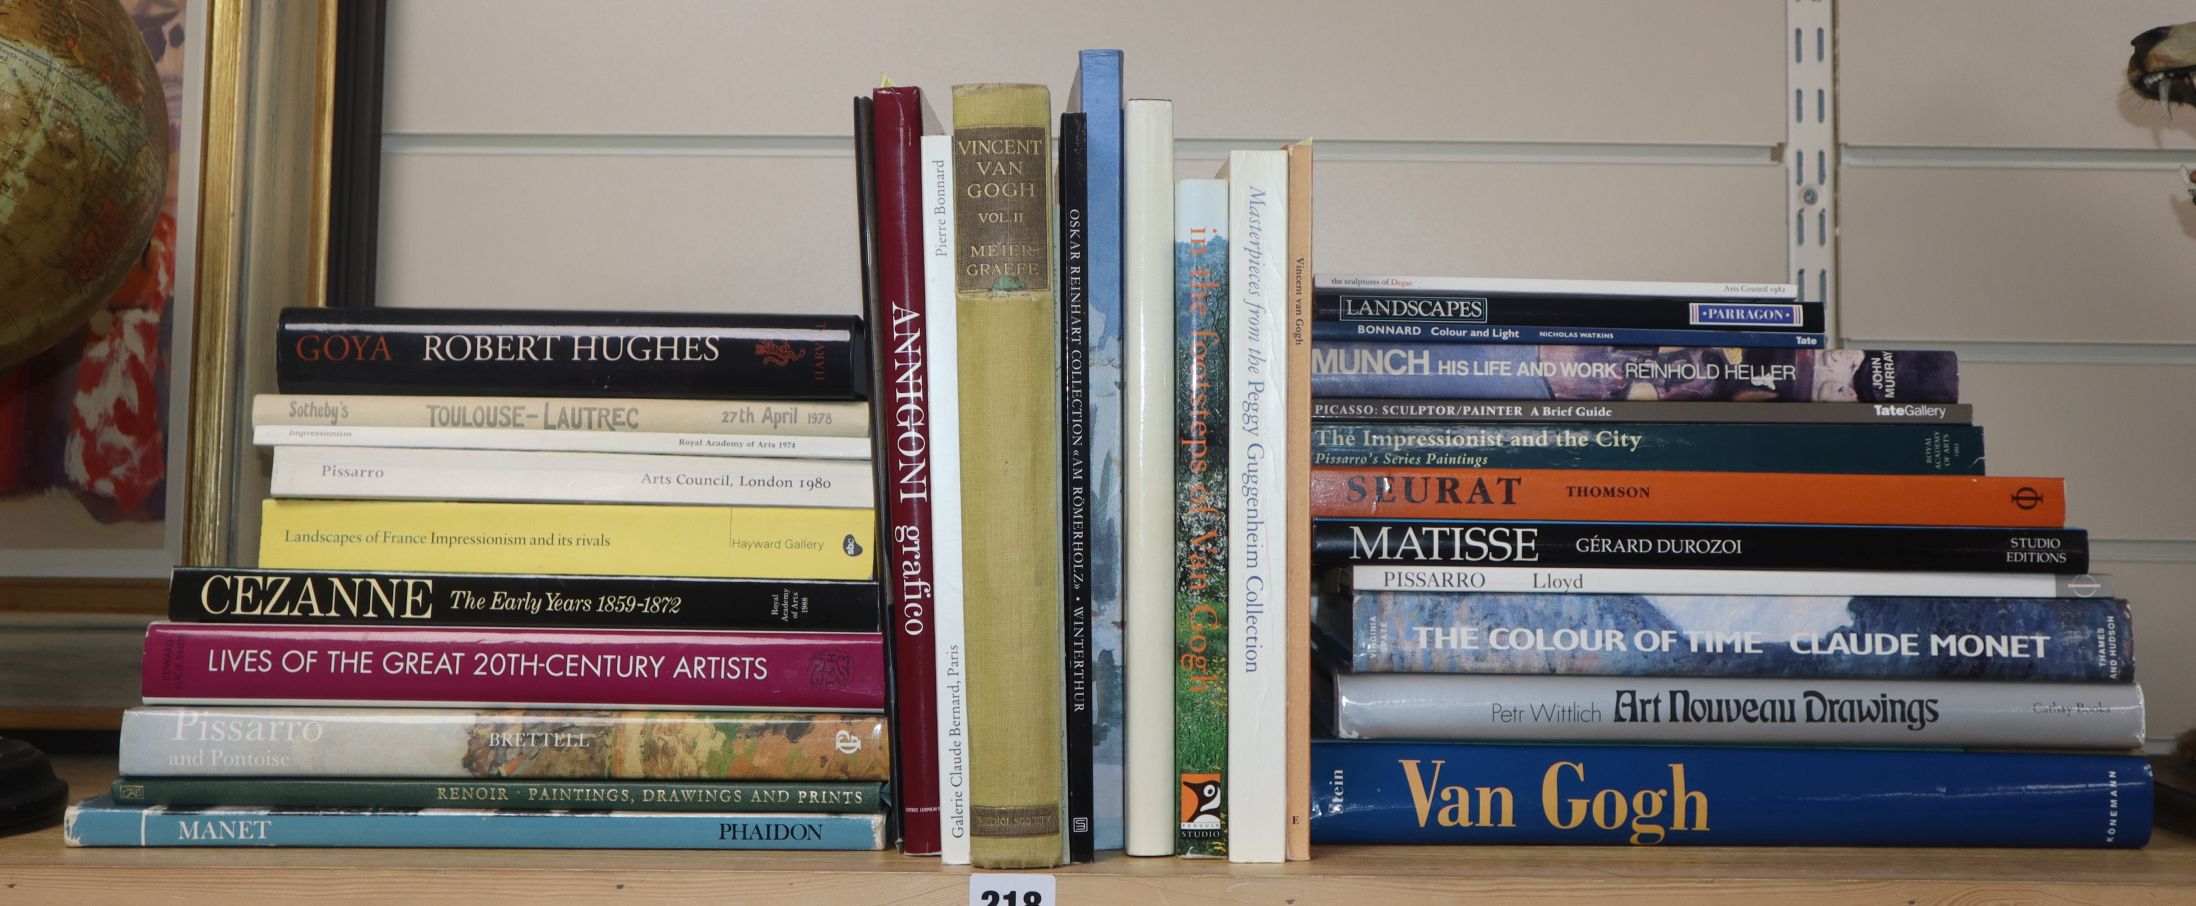 A quantity of reference books relating to Van Gogh, Art Nouveau Drawings, The Impressionists and The